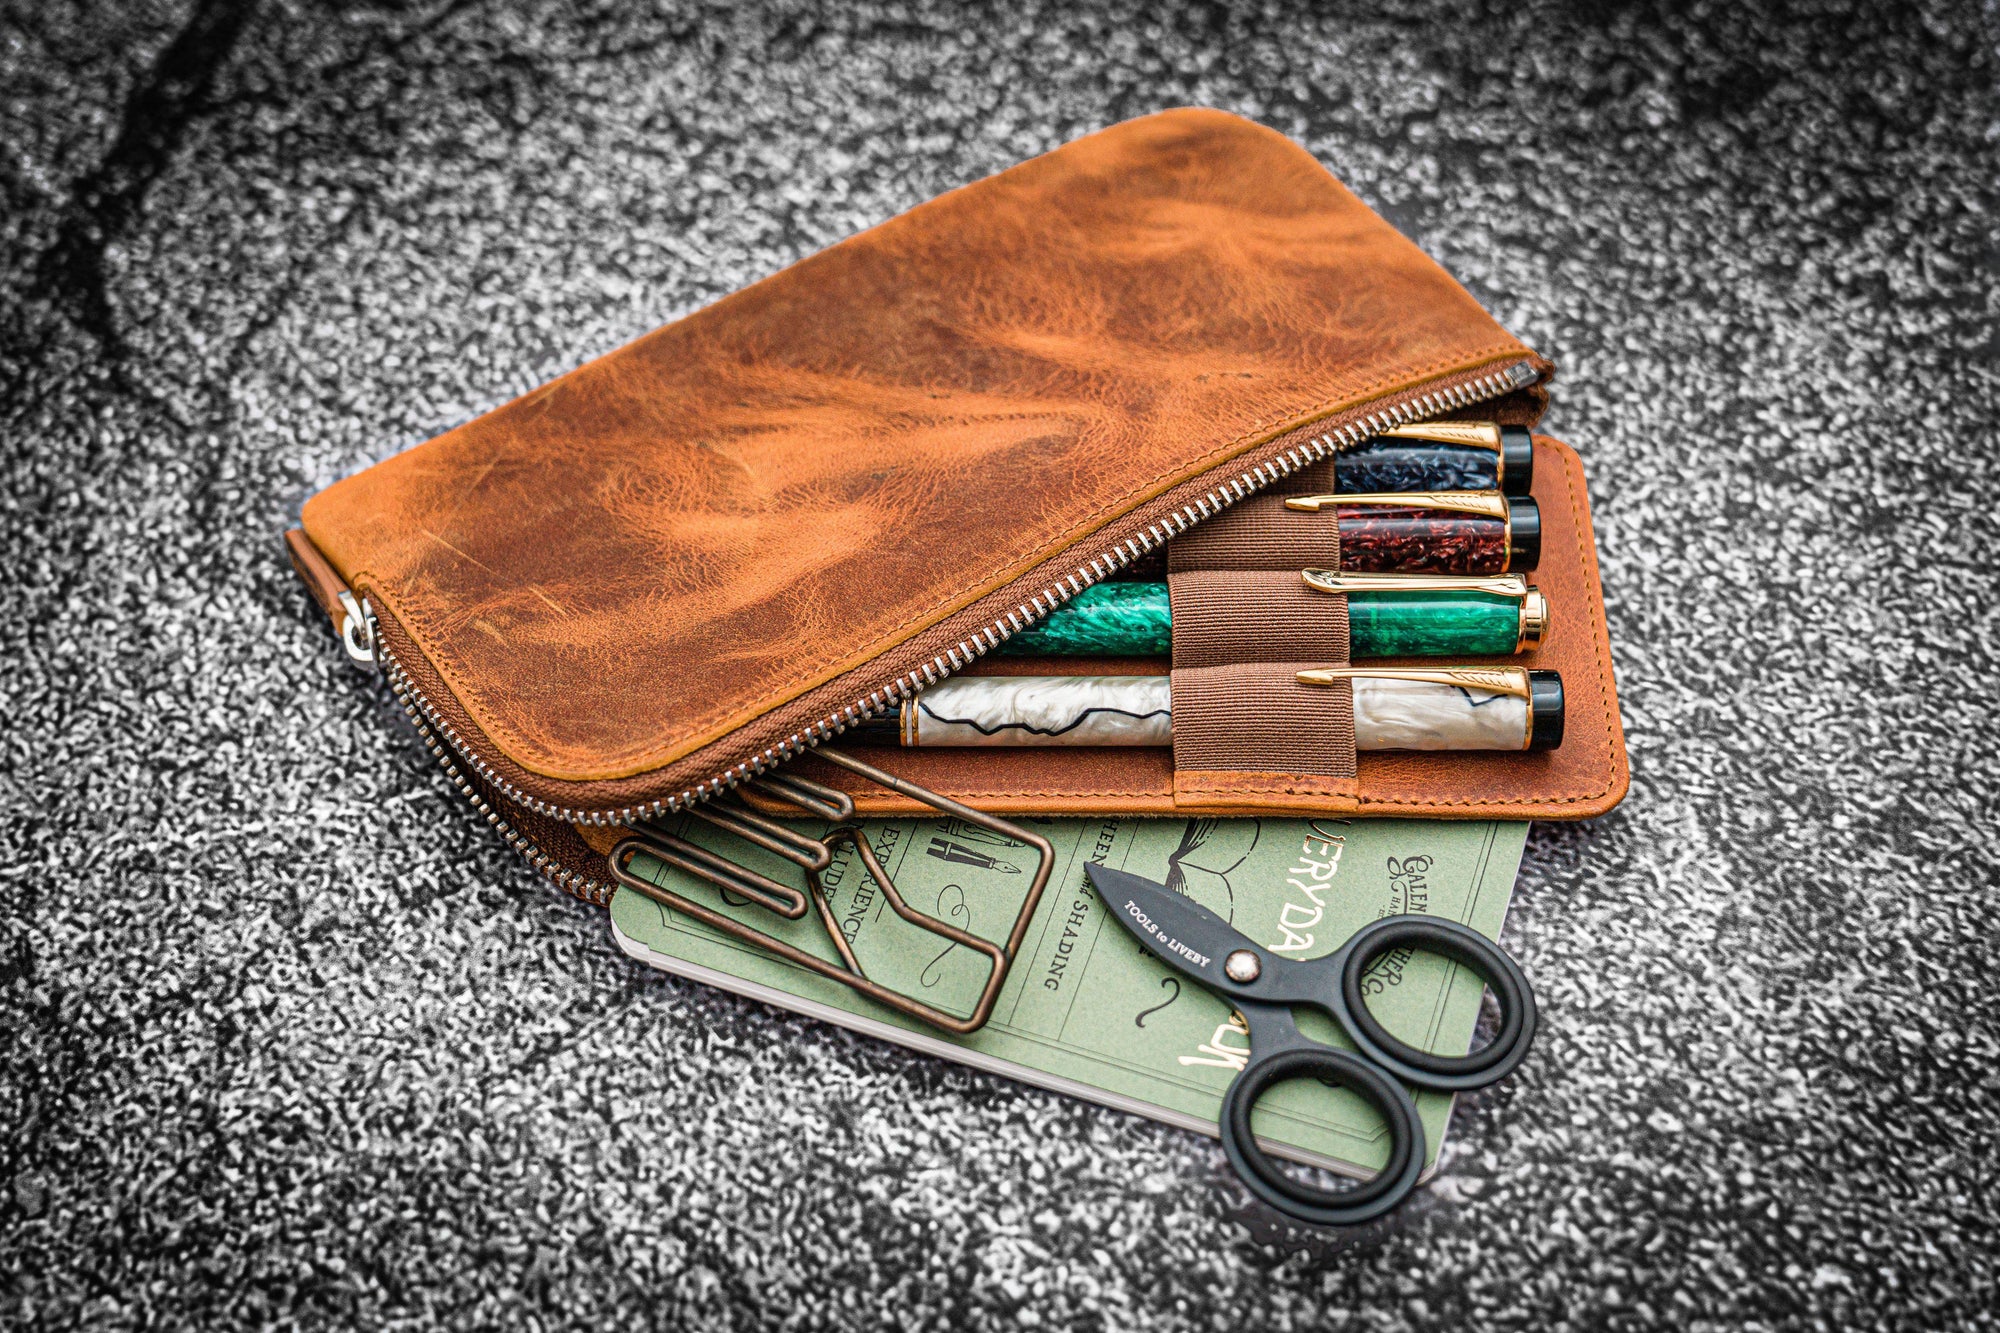 Paiman Leather Pen Holder | Handmade Leather Fountain Pen Pouch